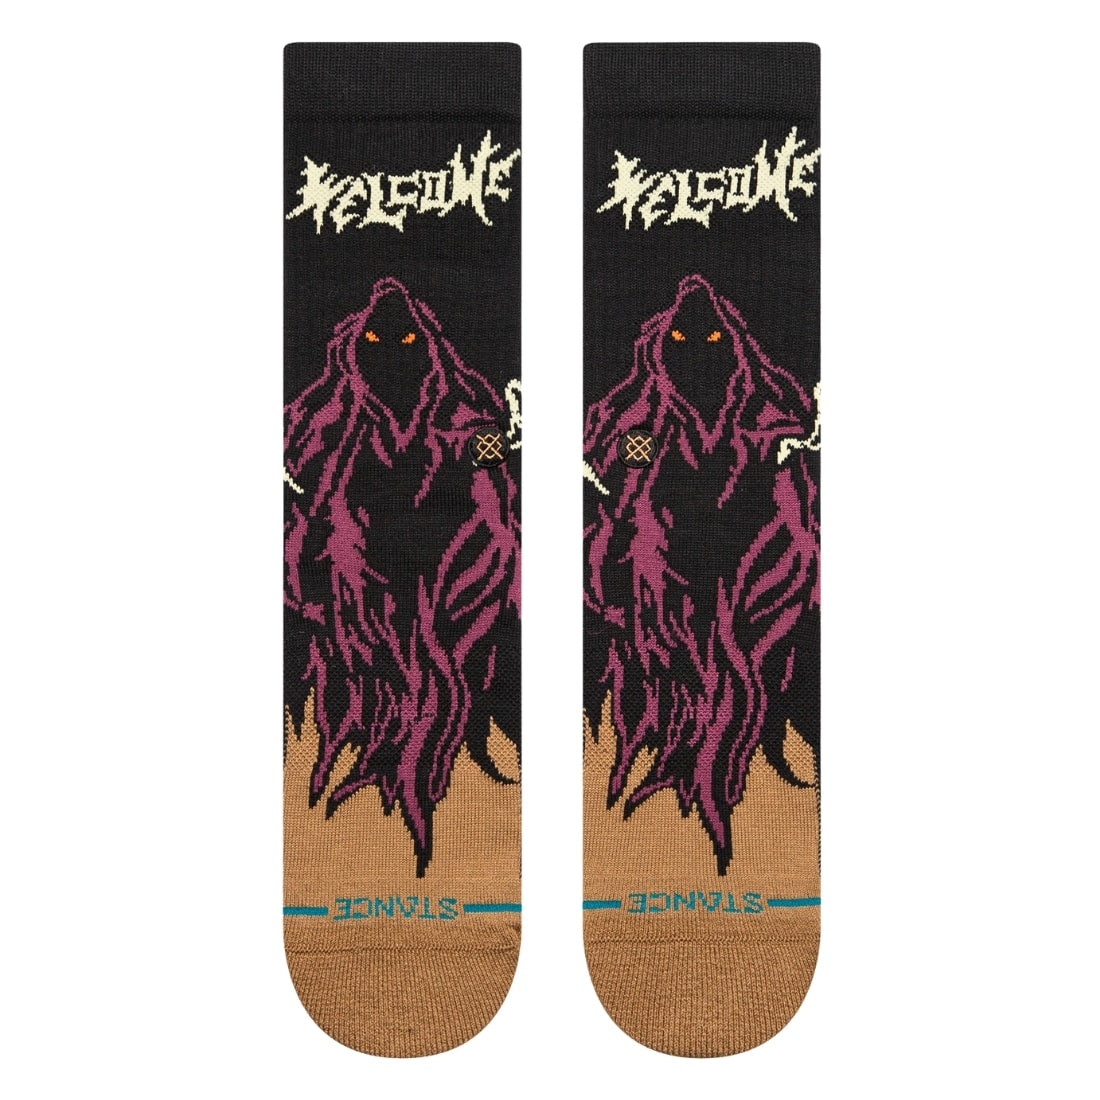 Stance X Welcome Skelly Crew Infiknit Socks - Black - Unisex Crew Length Socks by Stance